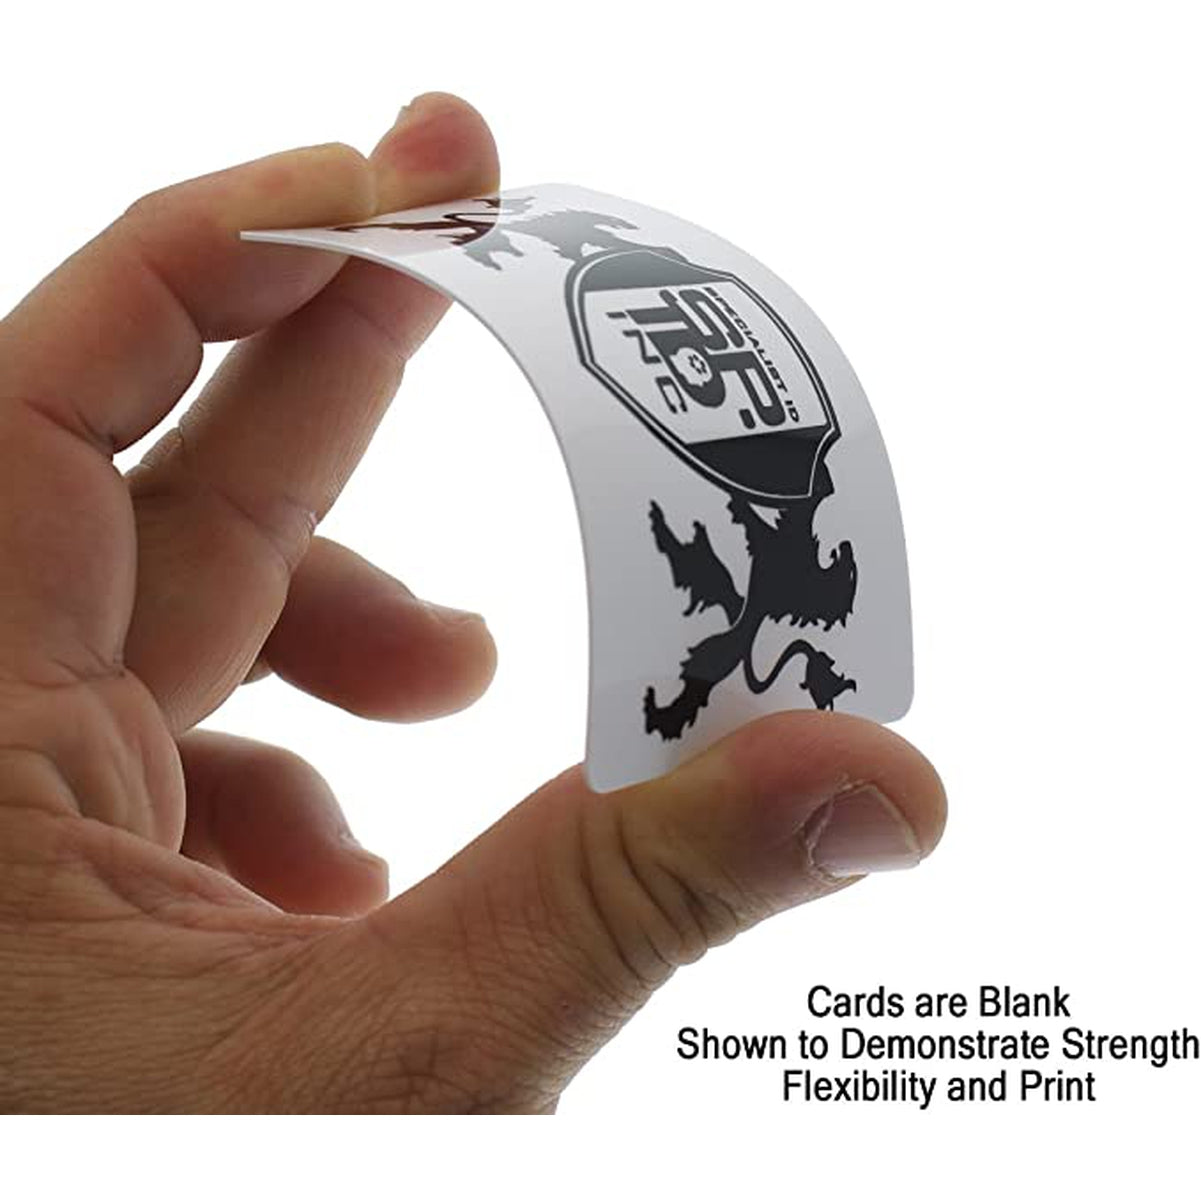 A hand bends a Premium Blank PVC Cards for ID Badge Printers - Graphic Quality CR80 30 Mil (CR80), demonstrating its flexibility and strength. Text indicates that the card is blank to showcase print quality, making it ideal for ID badge printers and creating professional employee ID badges.